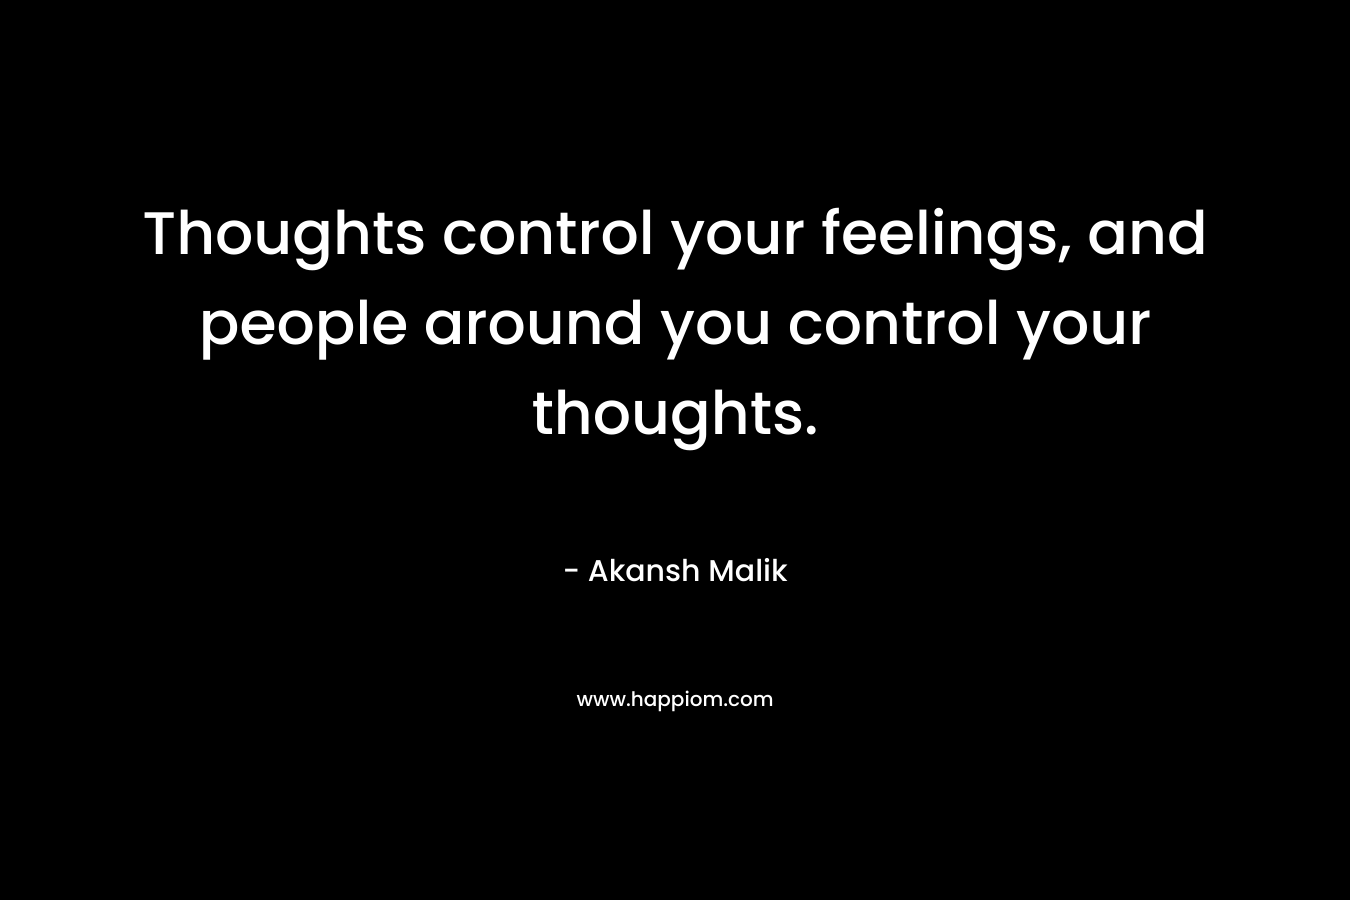 Thoughts control your feelings, and people around you control your thoughts.